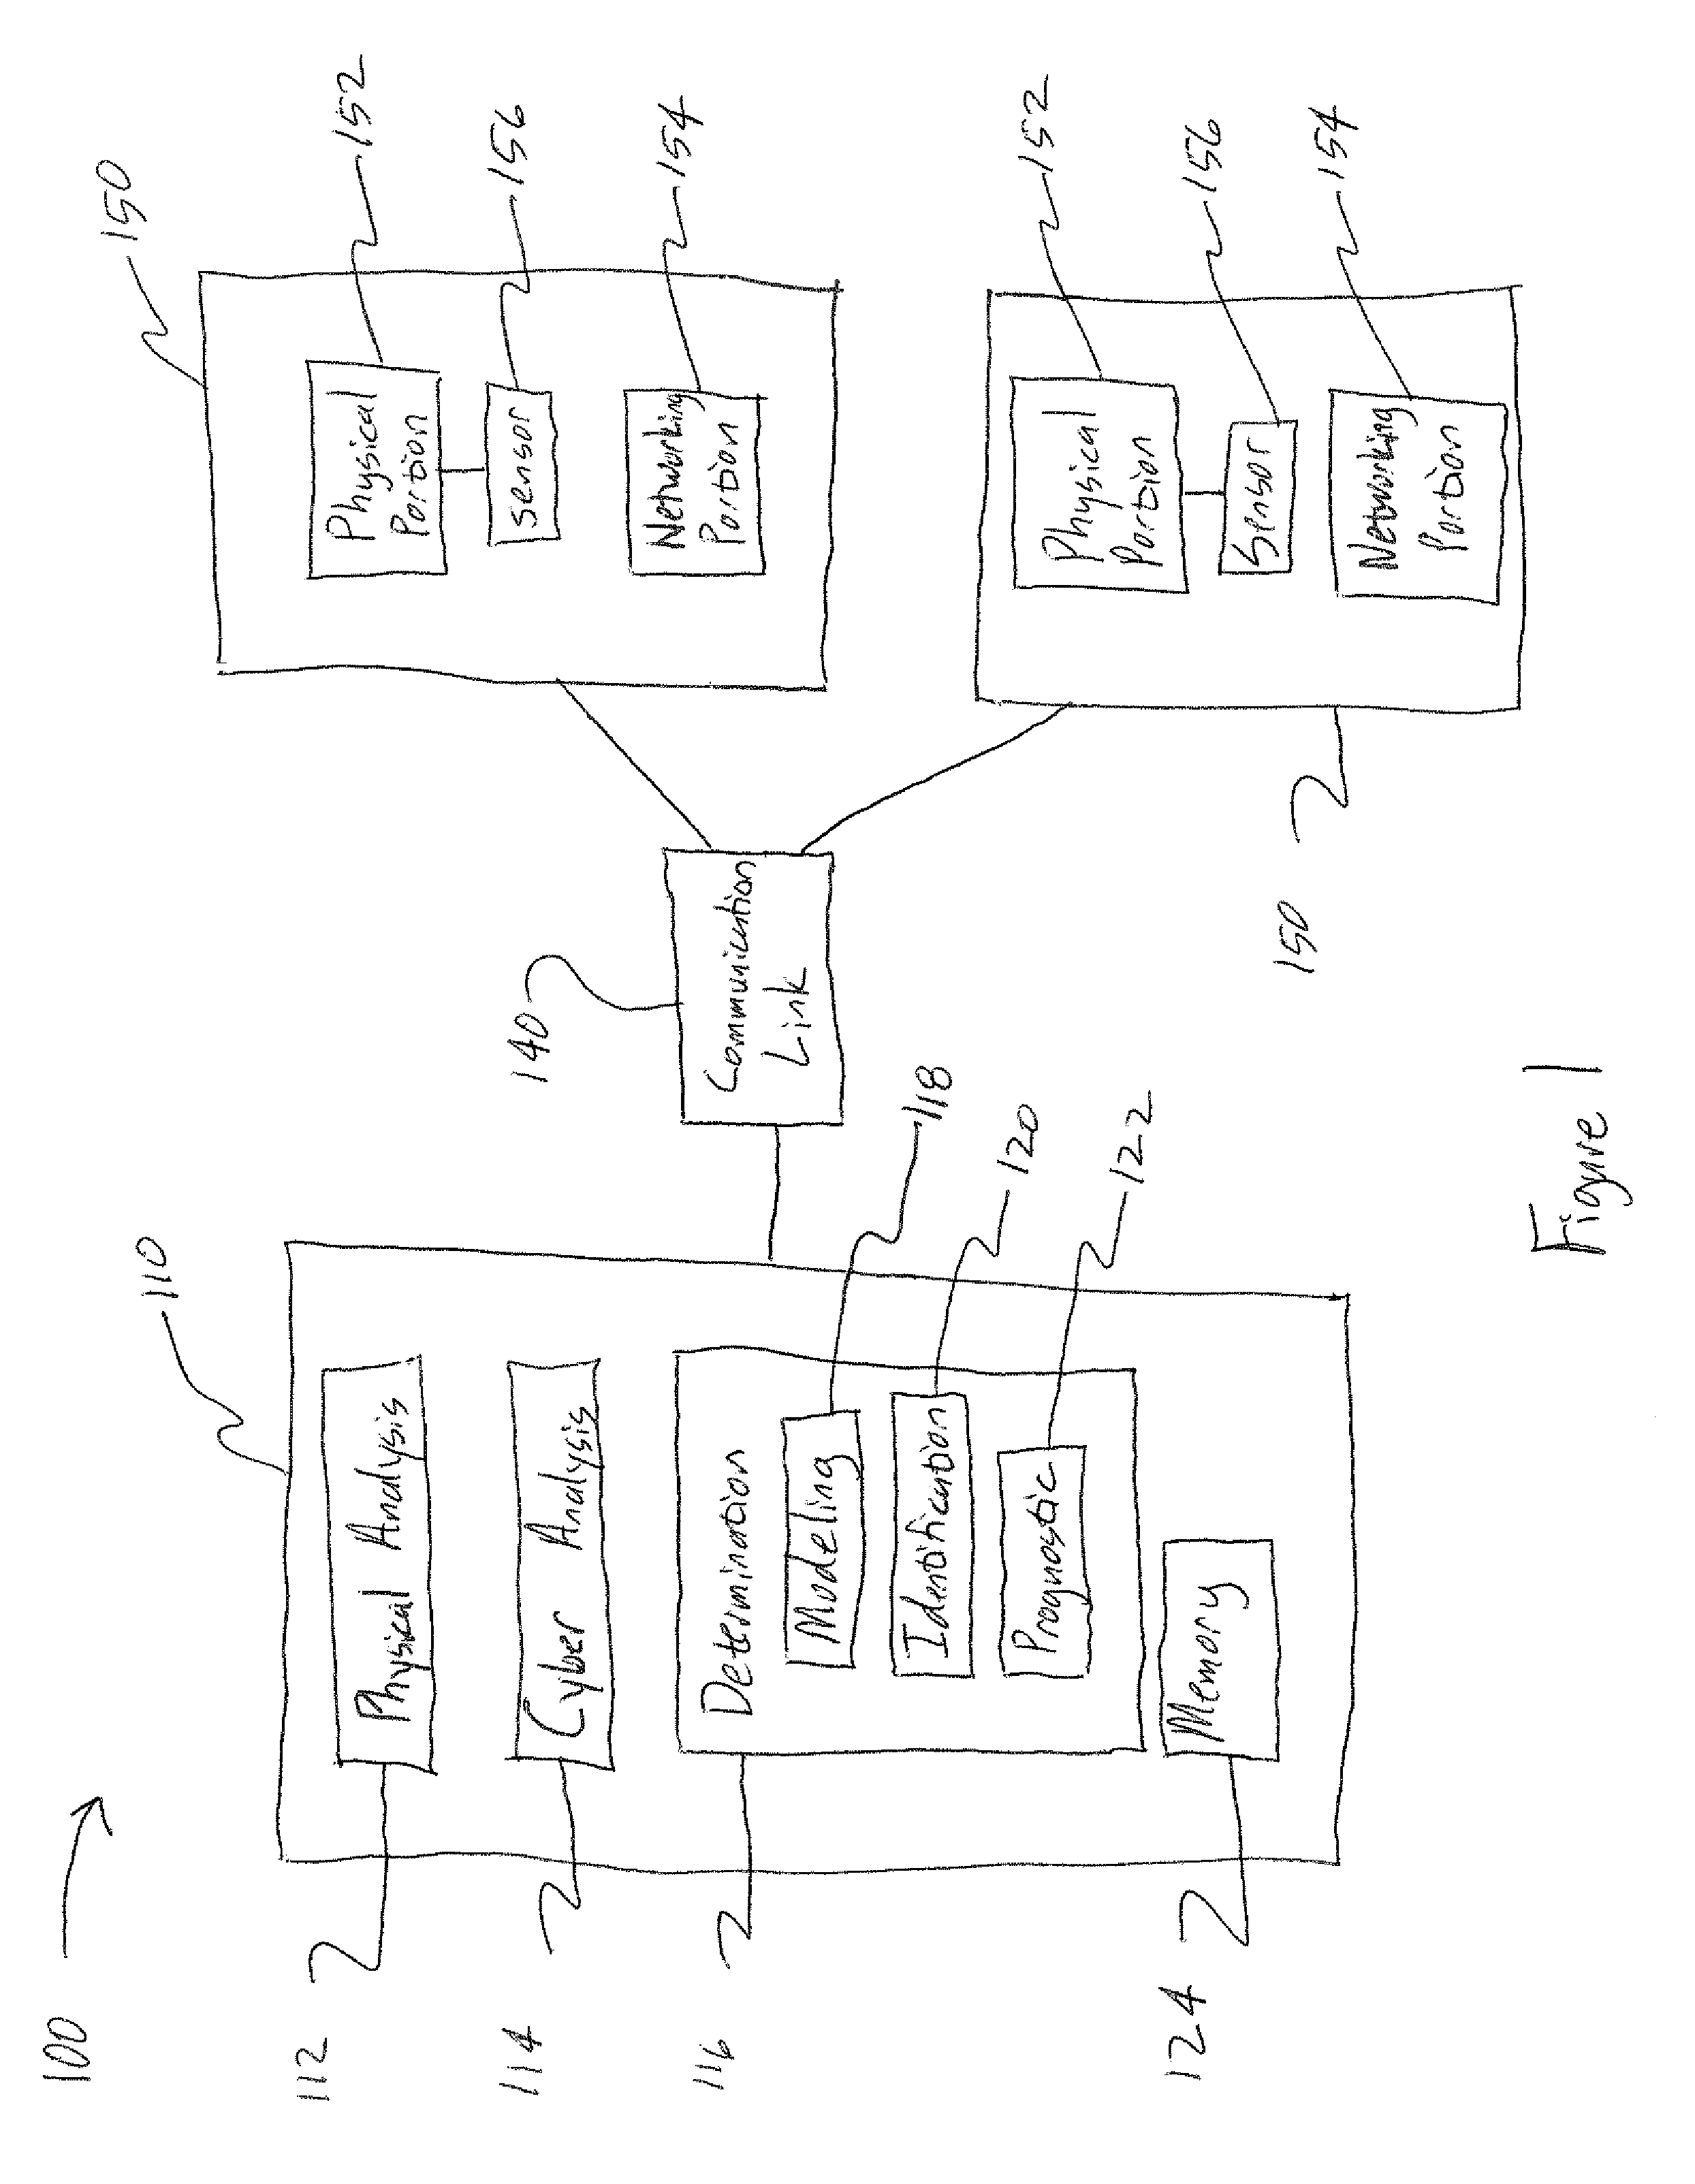 Systems and methods for remote monitoring, security, diagnostics, and prognostics